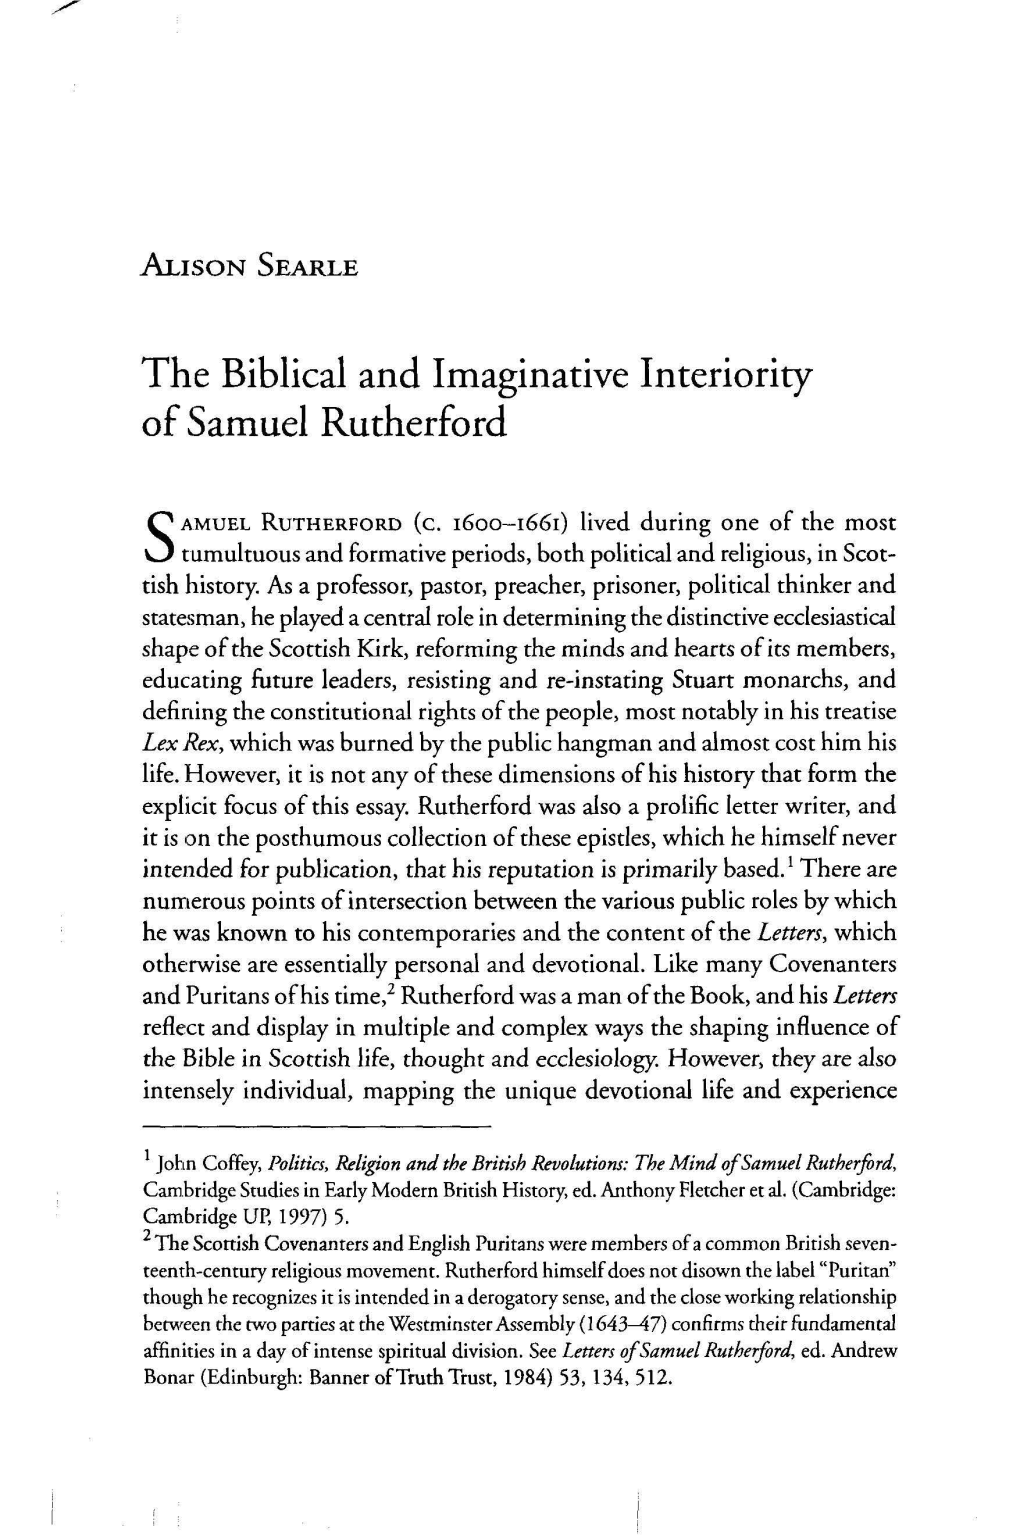 The Biblical and Imaginative Interiority of Samuel Rutherford